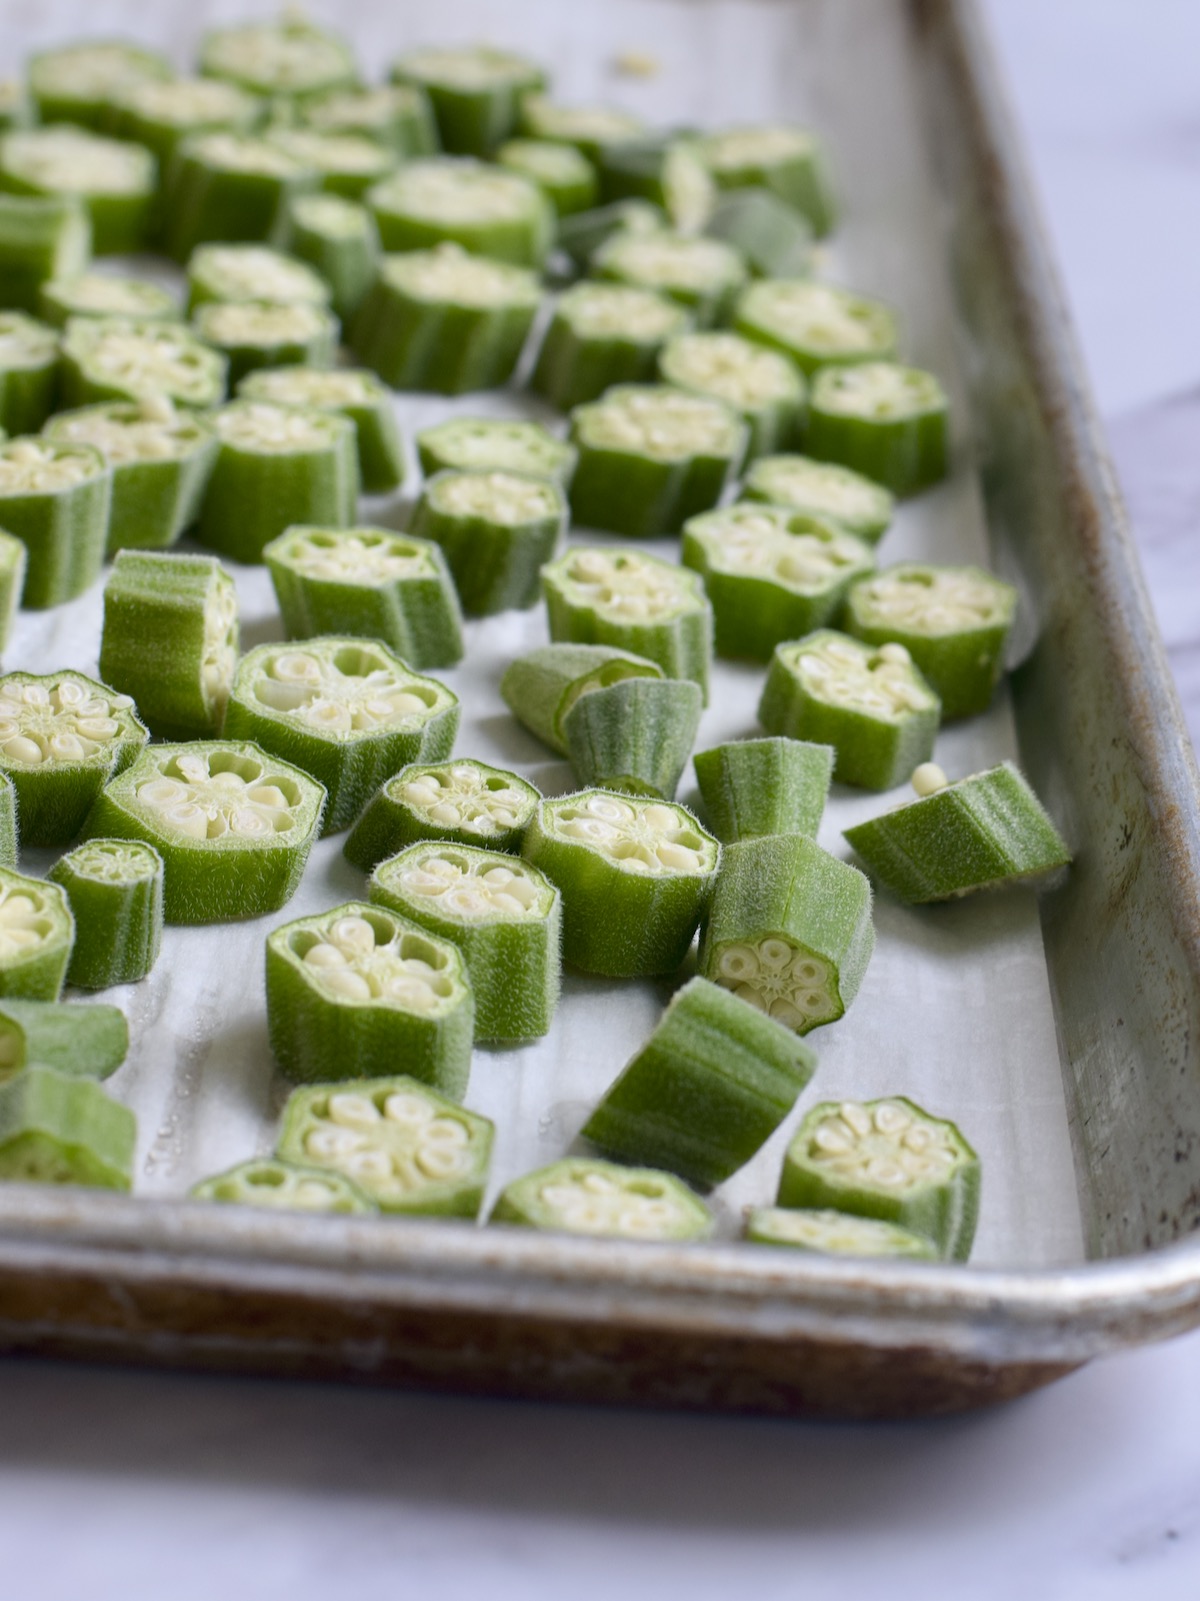 A lined baking sheet filled with slices of frozen okra.